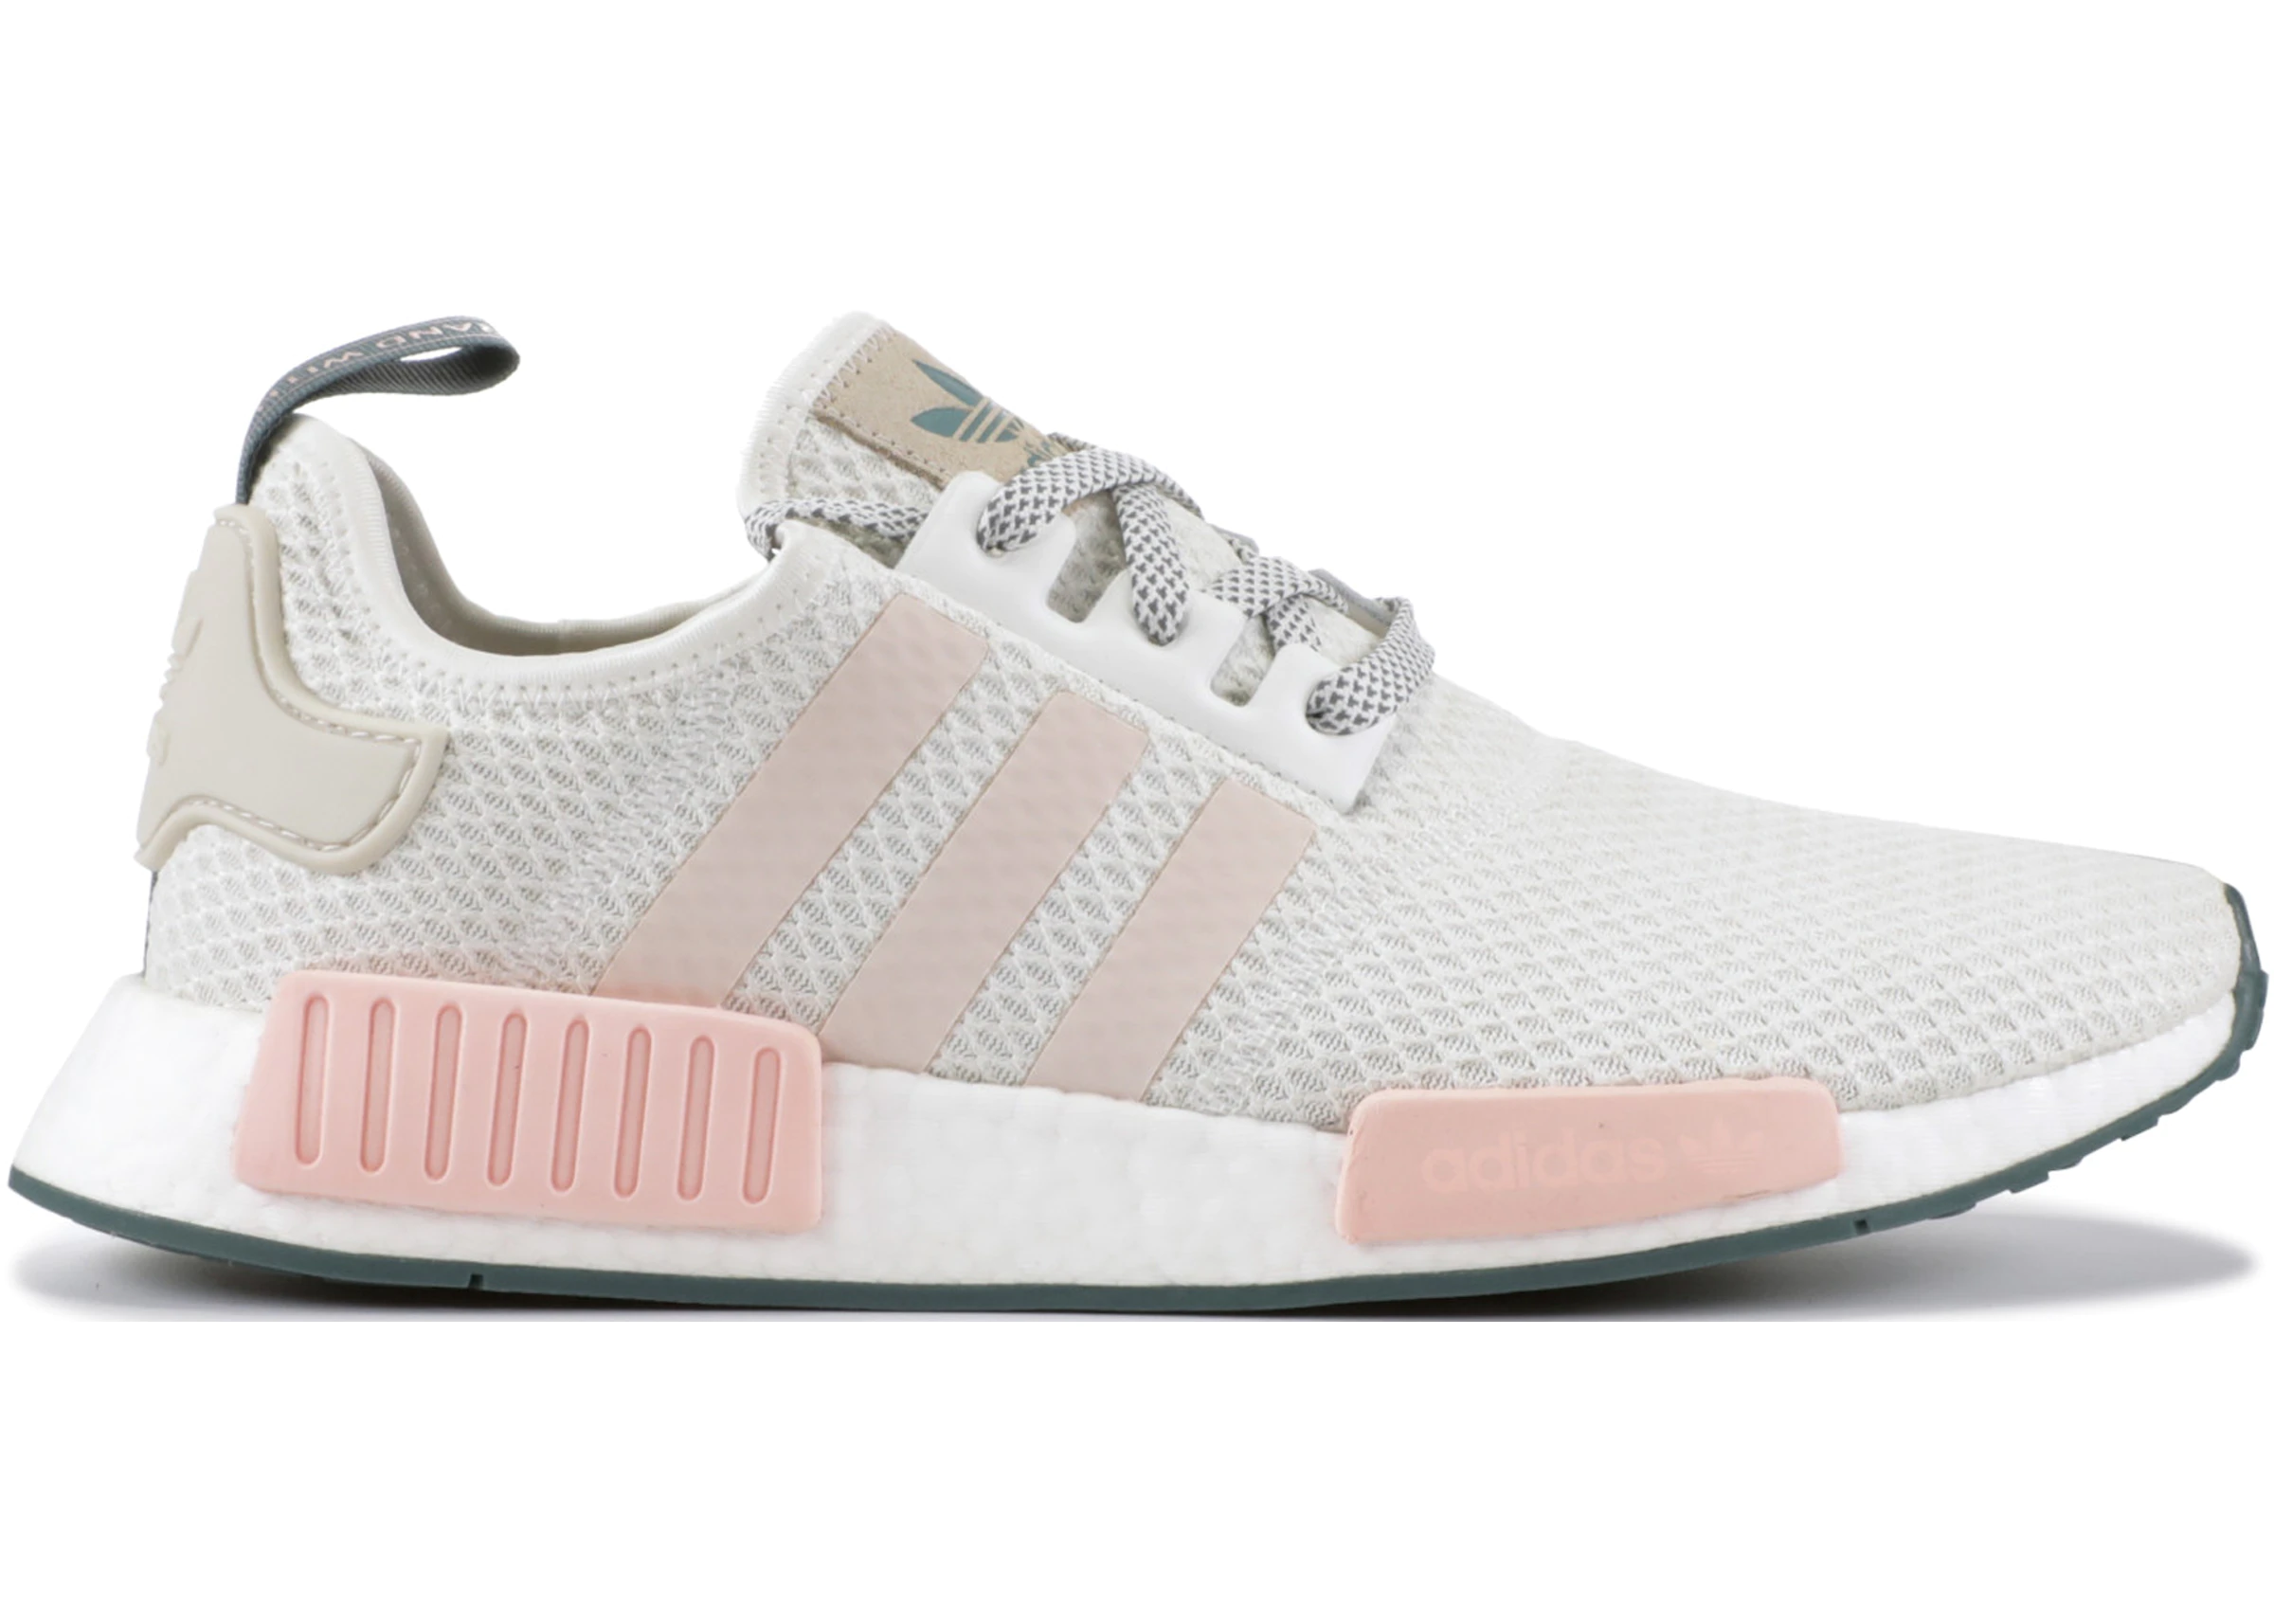 adidas NMD R1 White Icey Pink (W) - D97232 - US